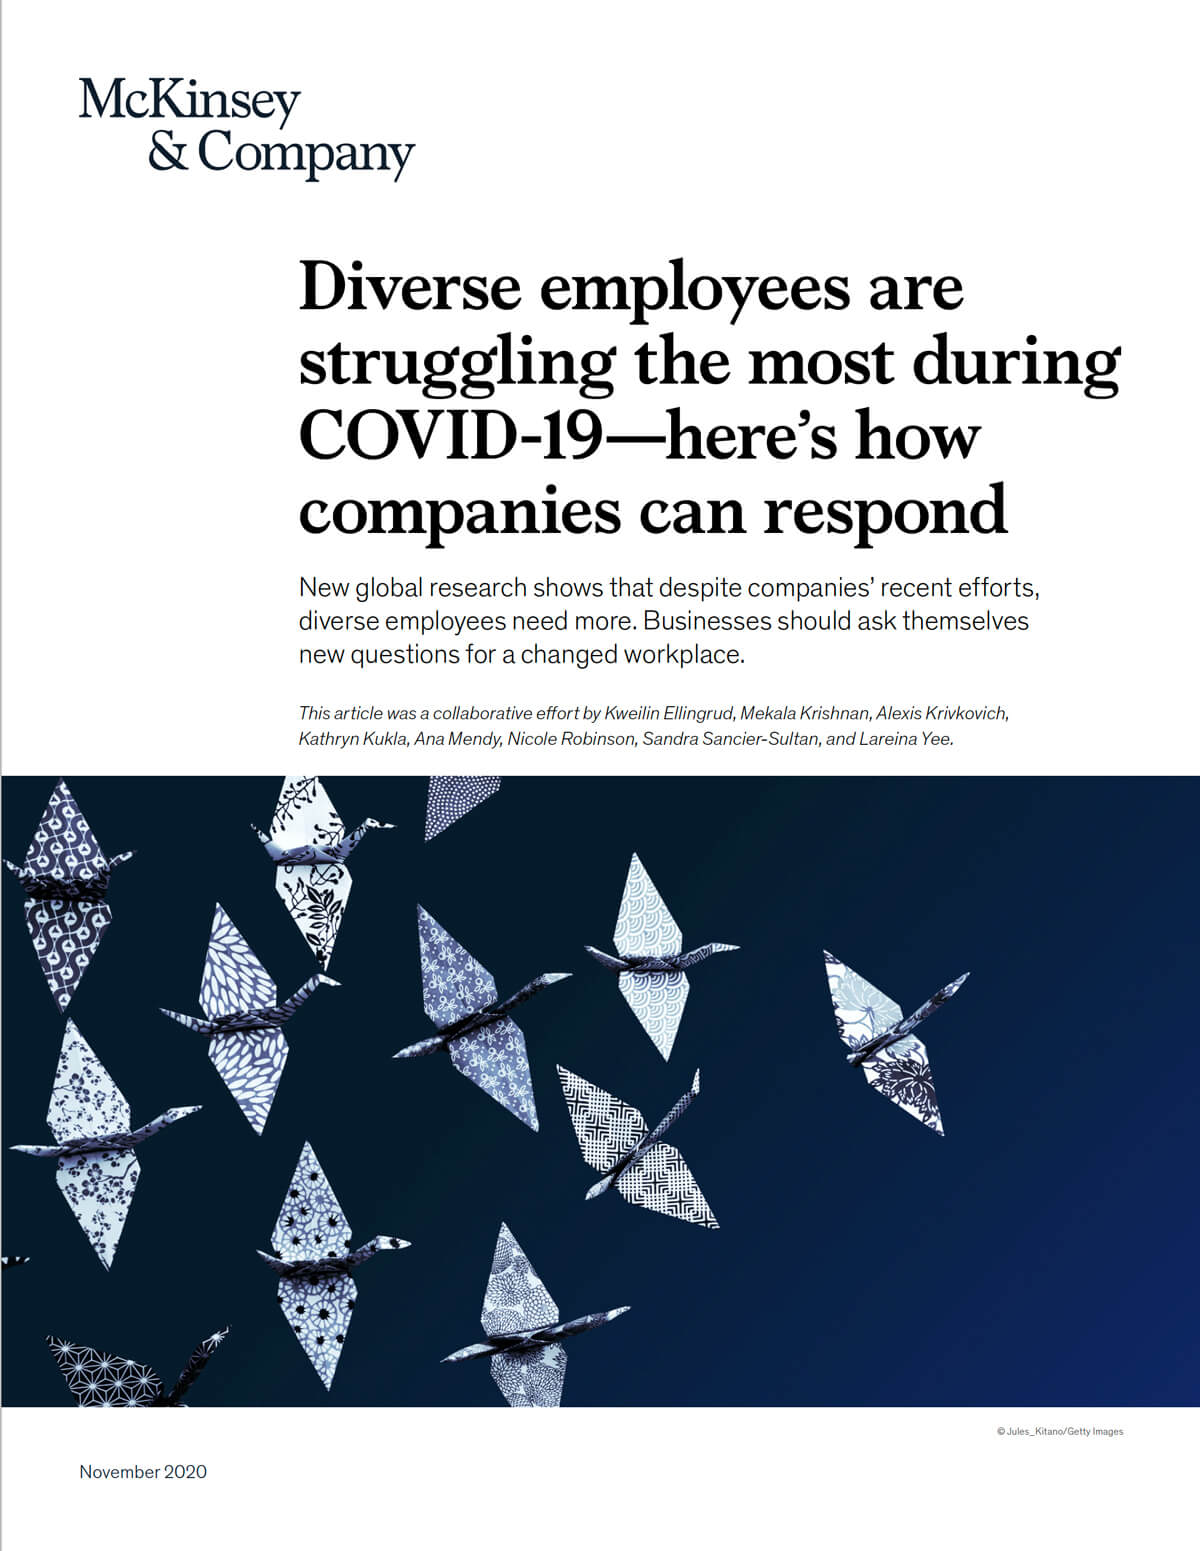 Diverse Employees are struggling the most during Covid